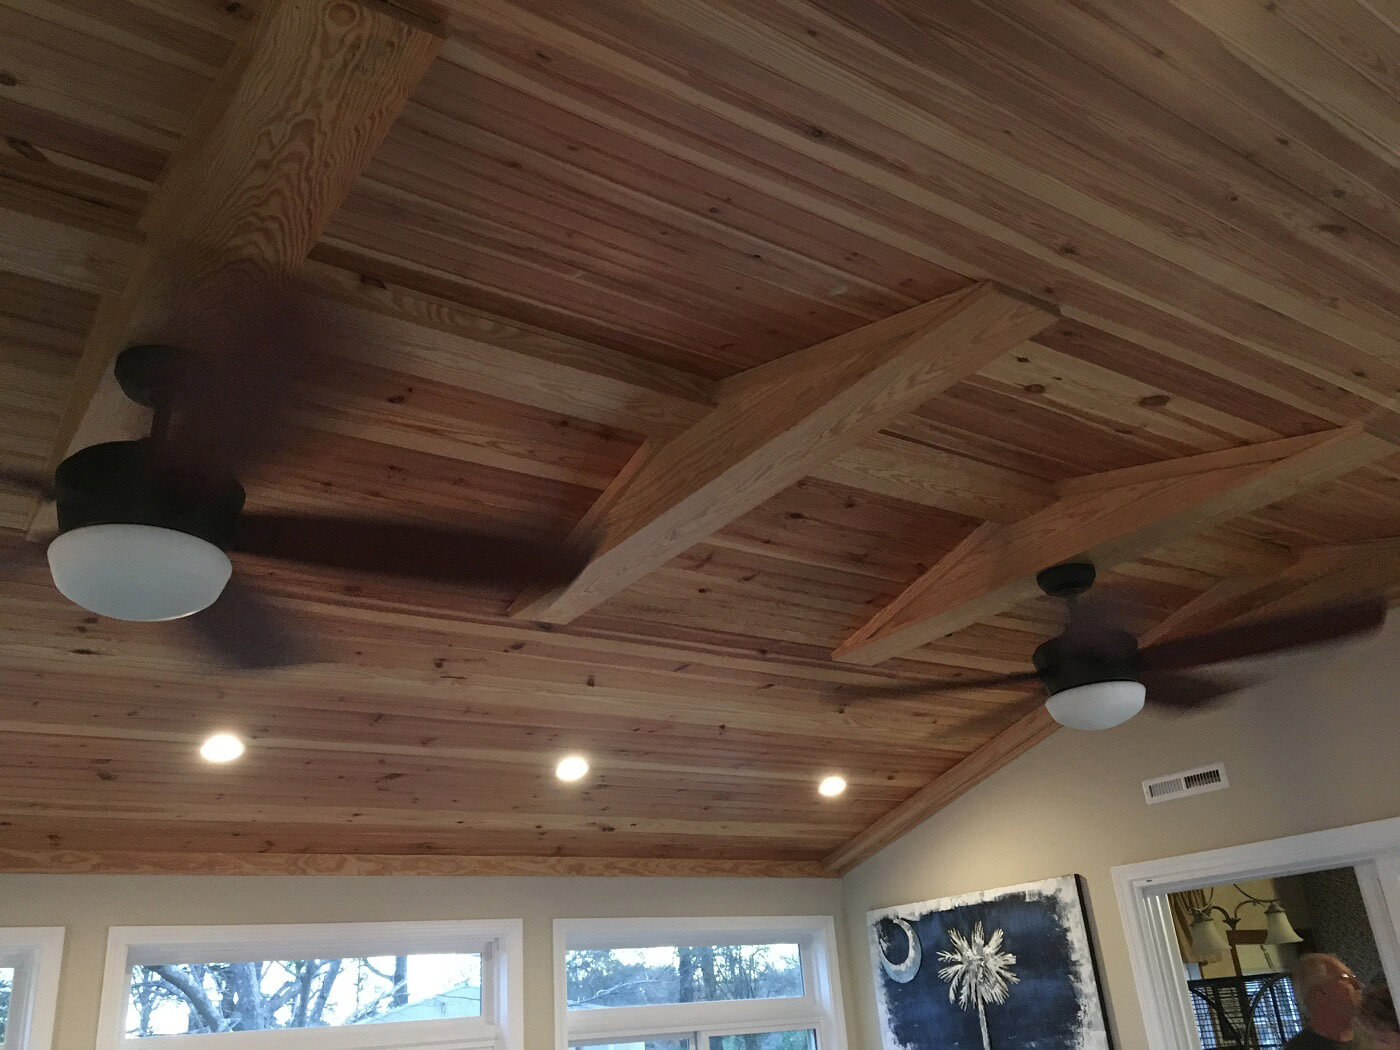 Sunroom ceiling with fan and lighting